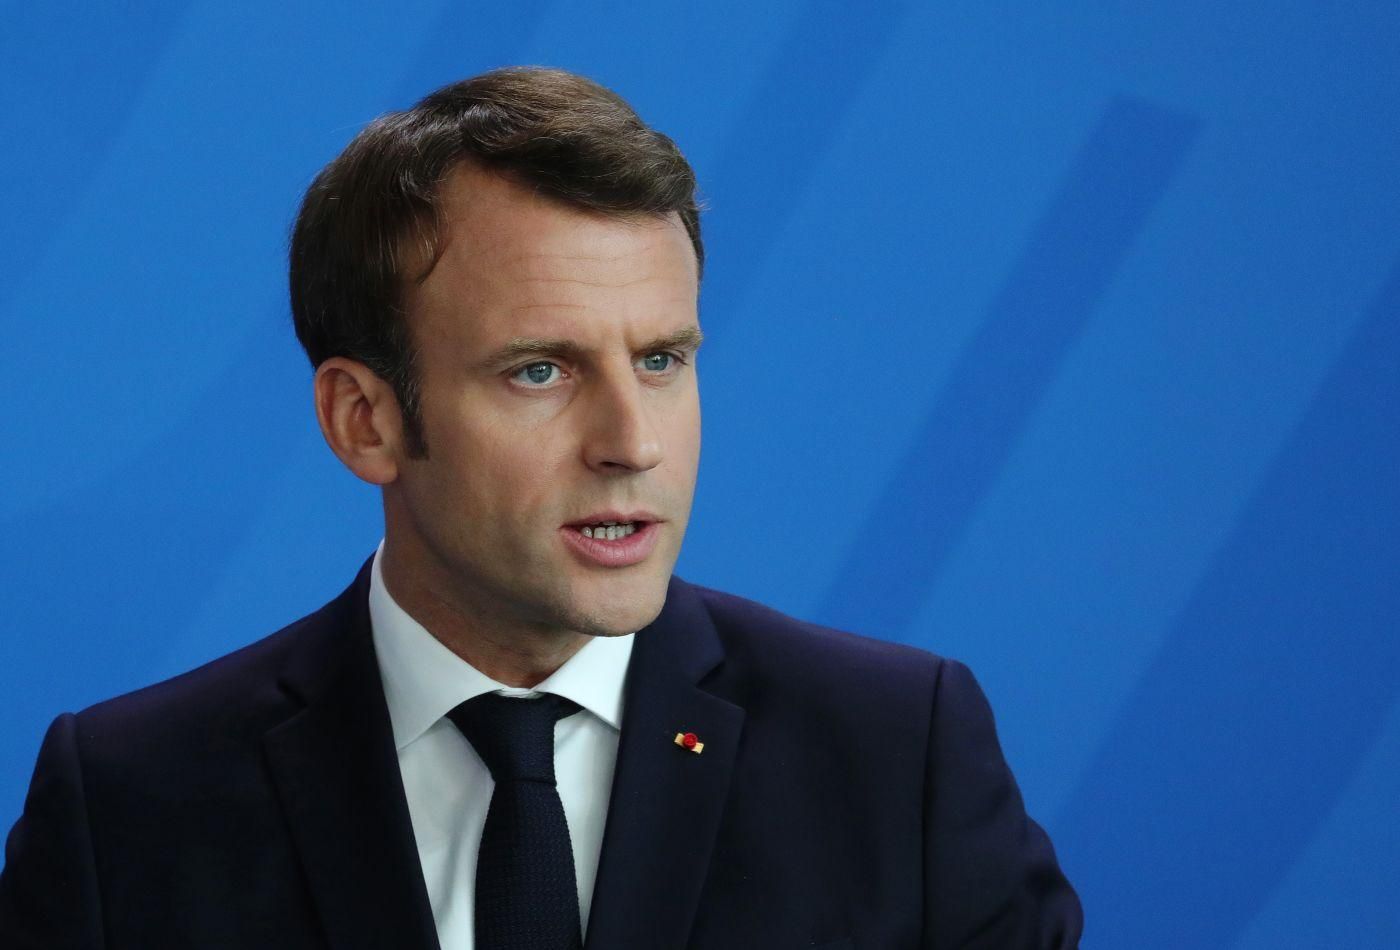 Macron admits rifts are deepening in Europe, calls for compromises